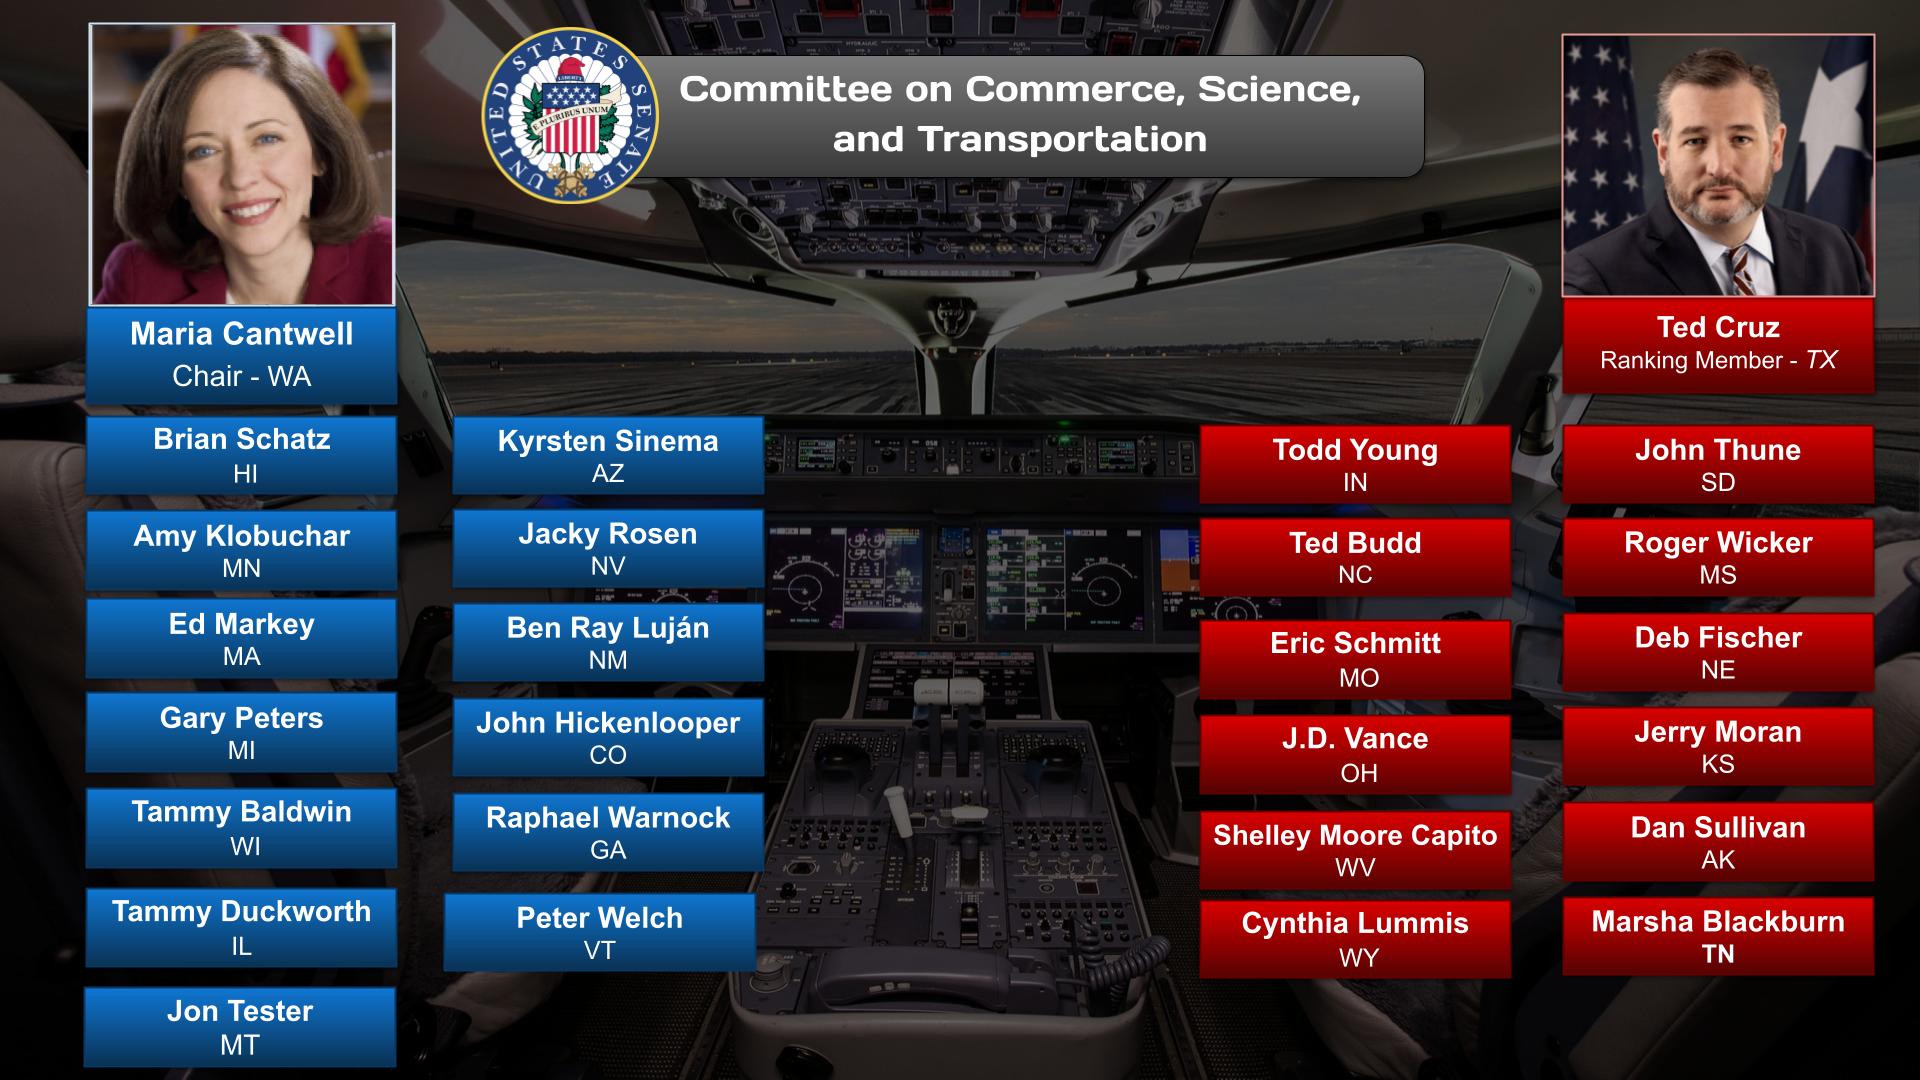 Committee on Commerce, Science, and Transportation